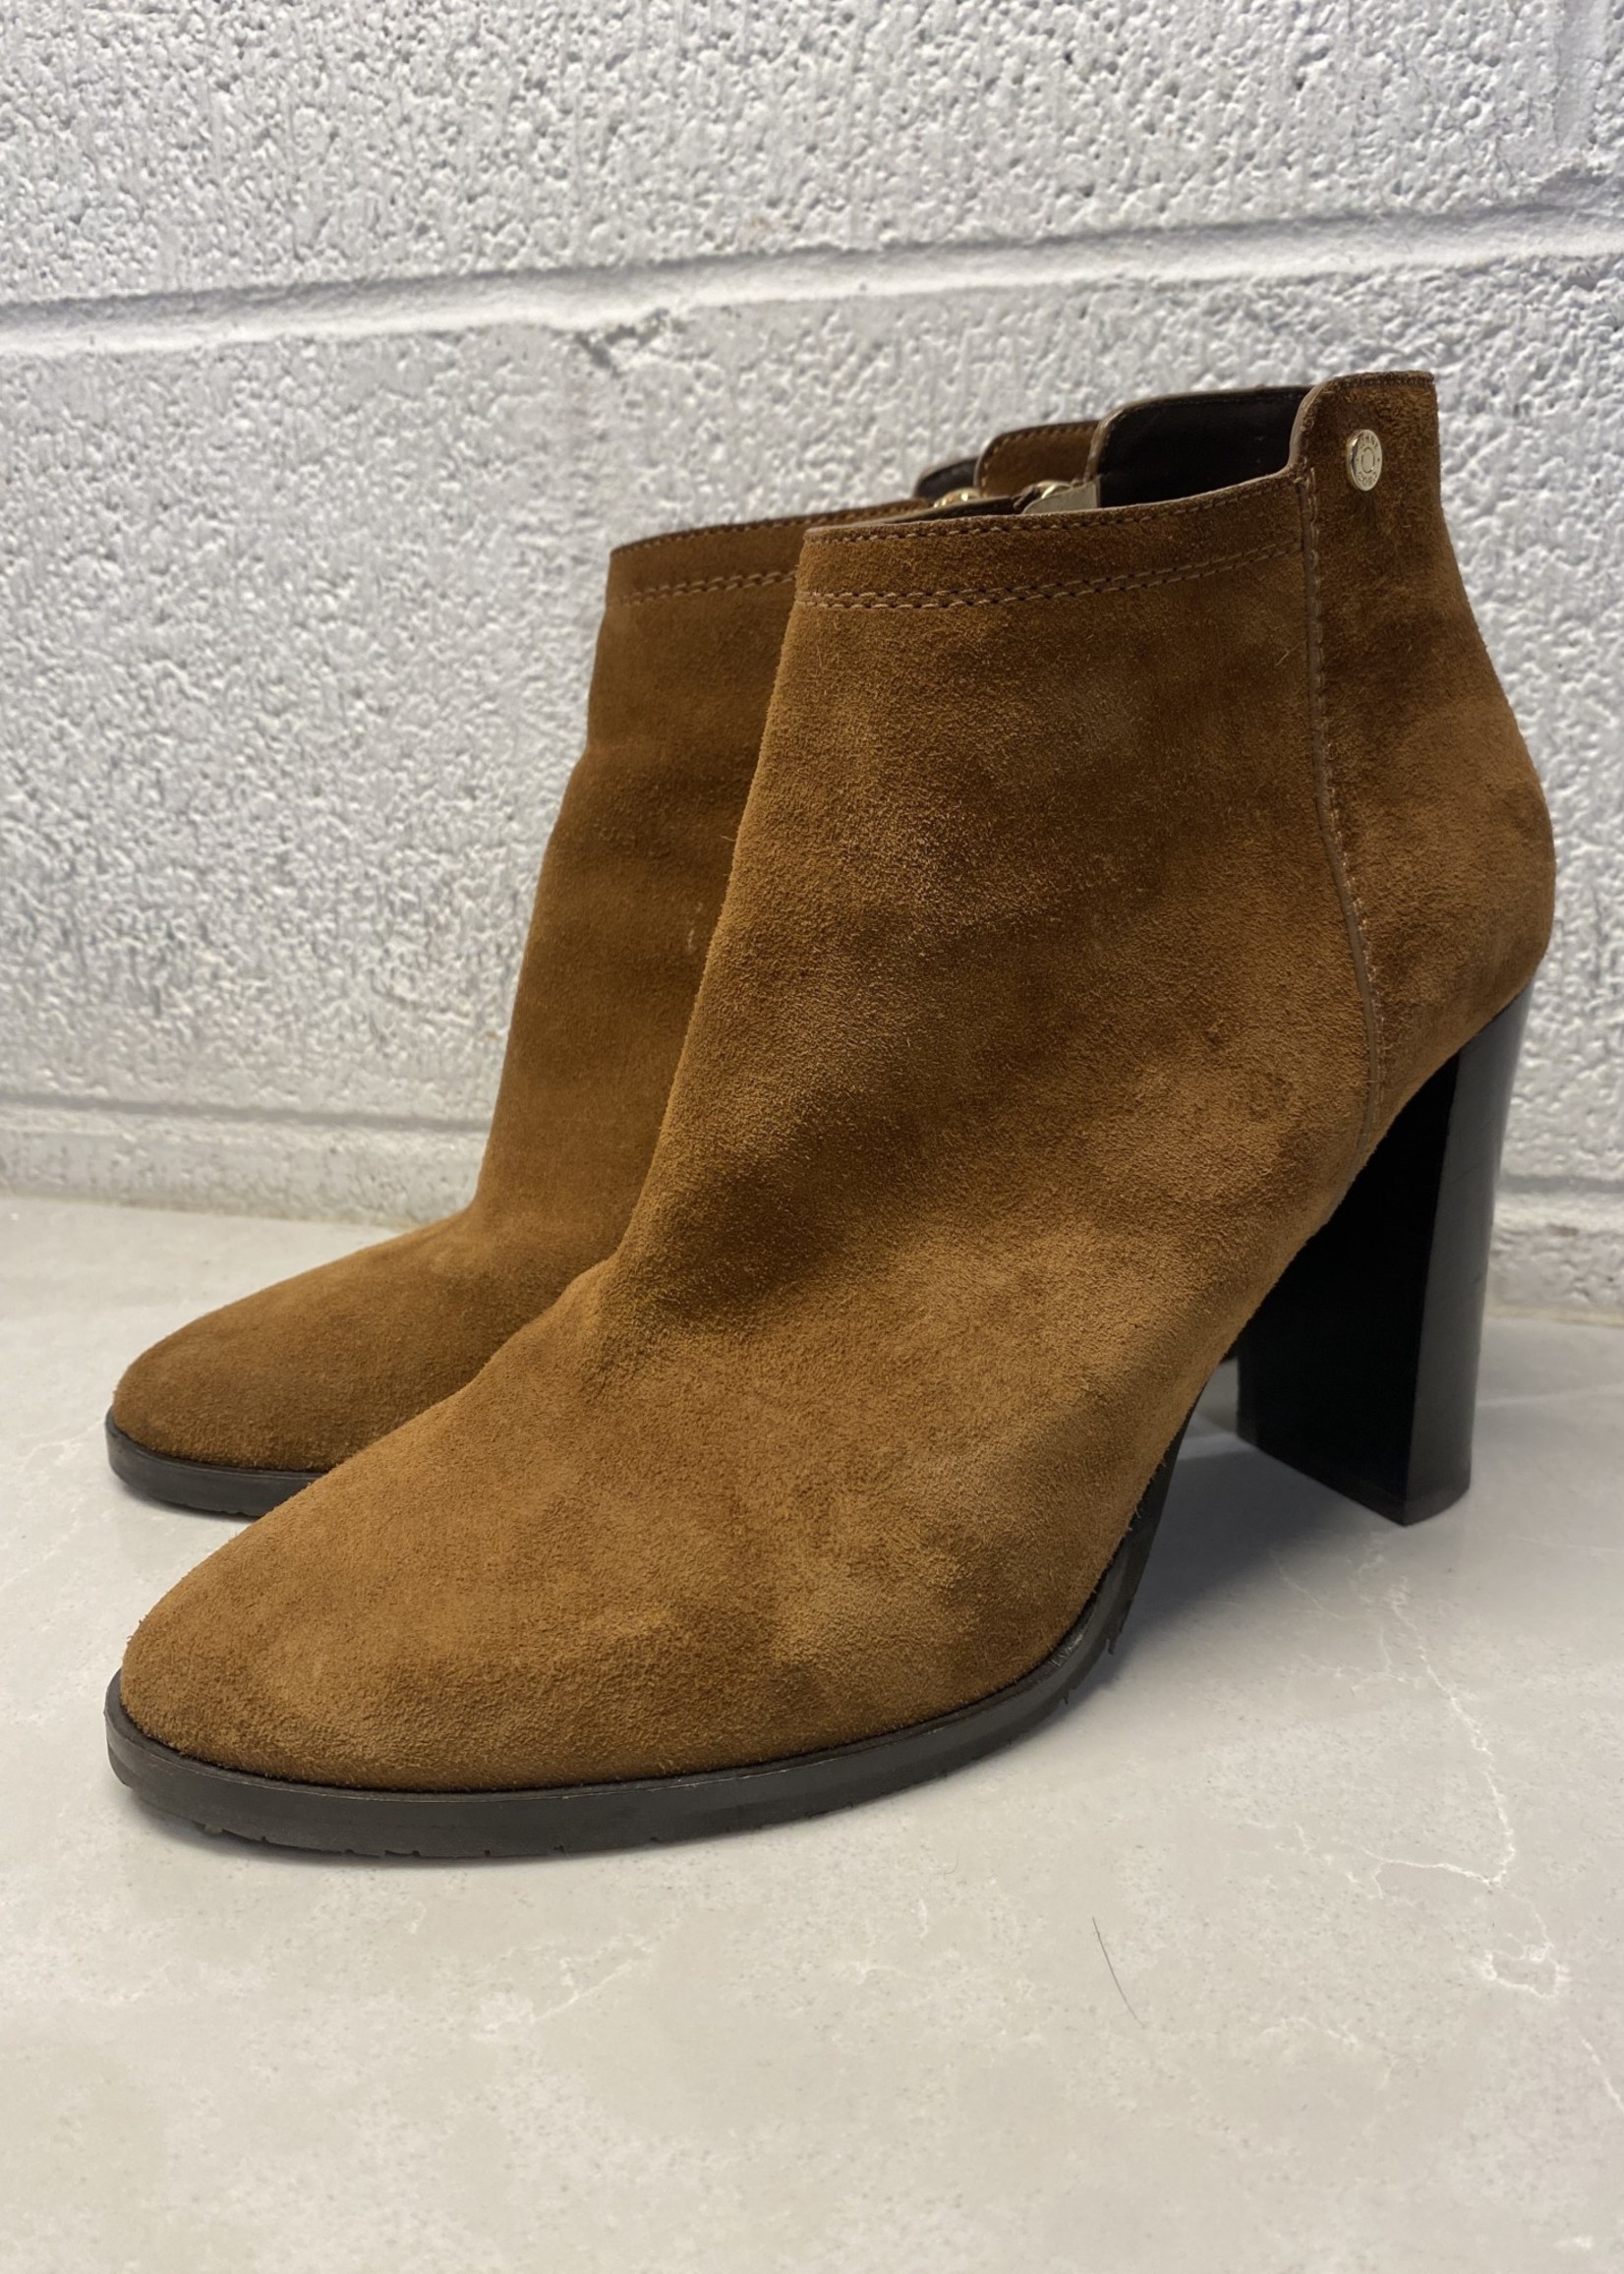 Jimmy Choo Brown Suede Heeled Boots 40/9